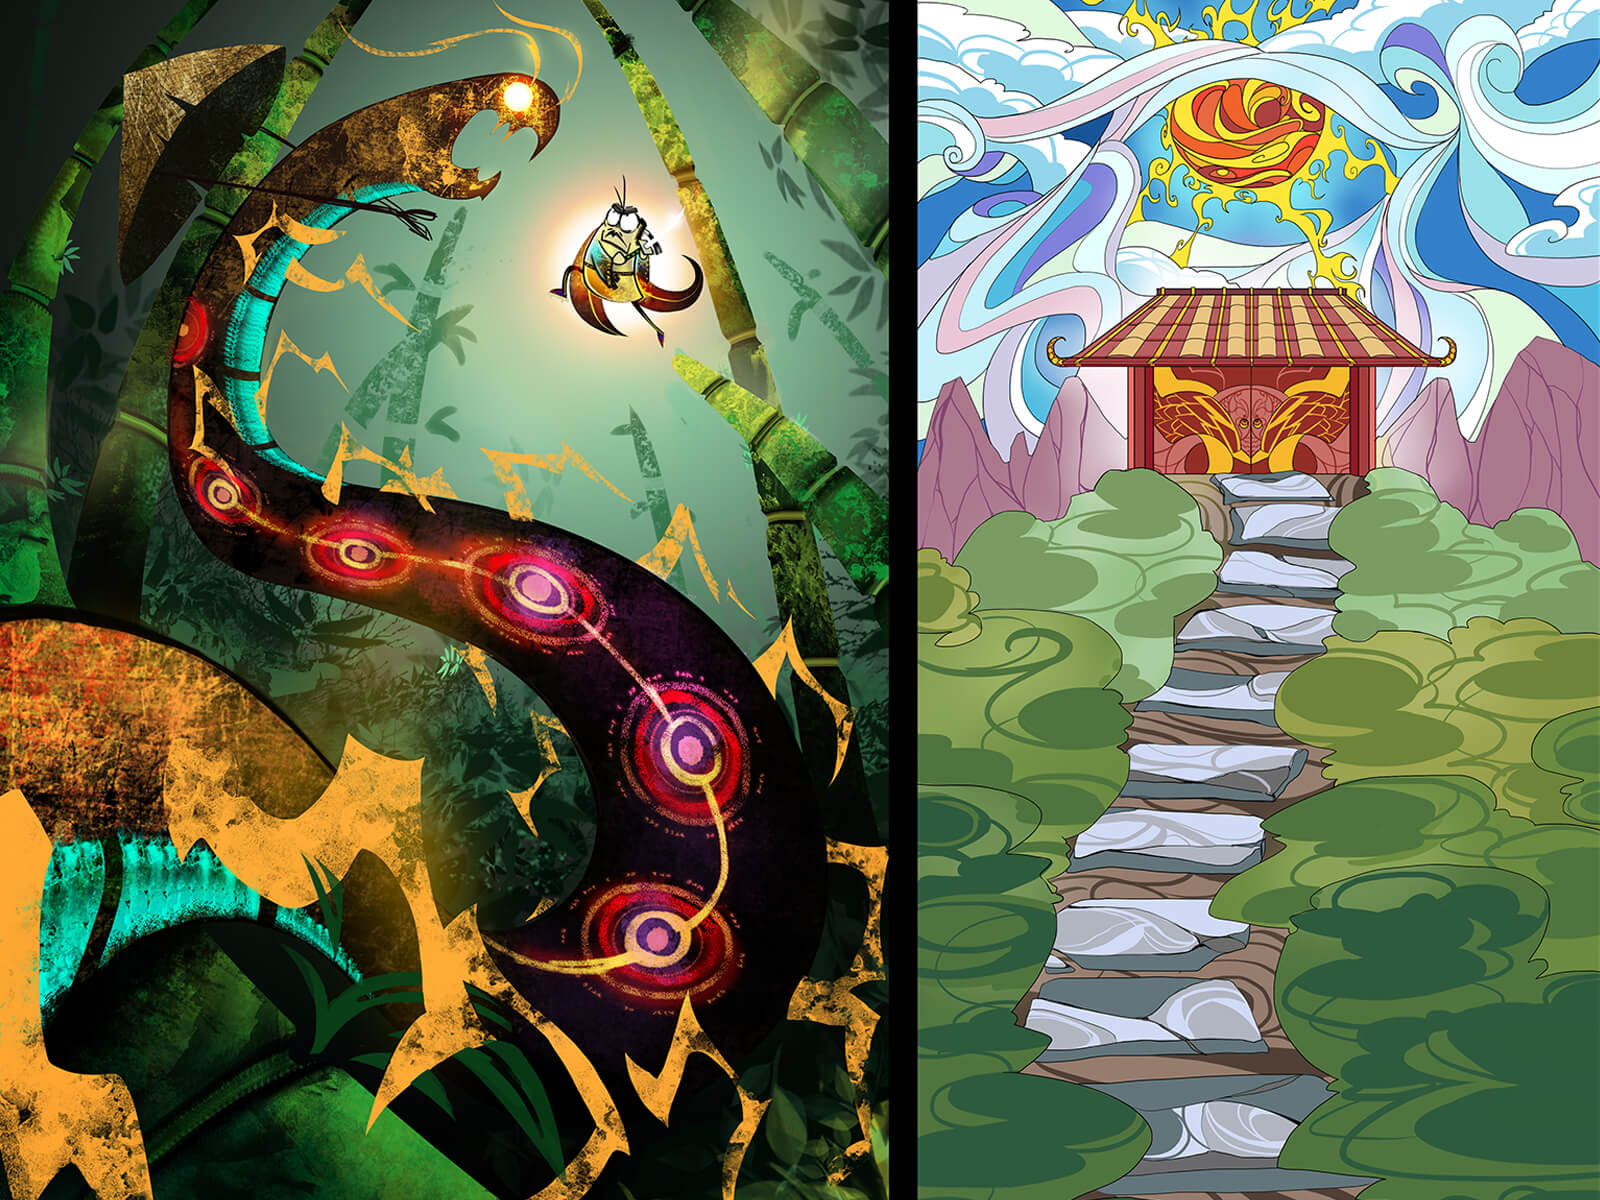 Two scenes in different art styles: a fight between beasts, and an ethereal temple